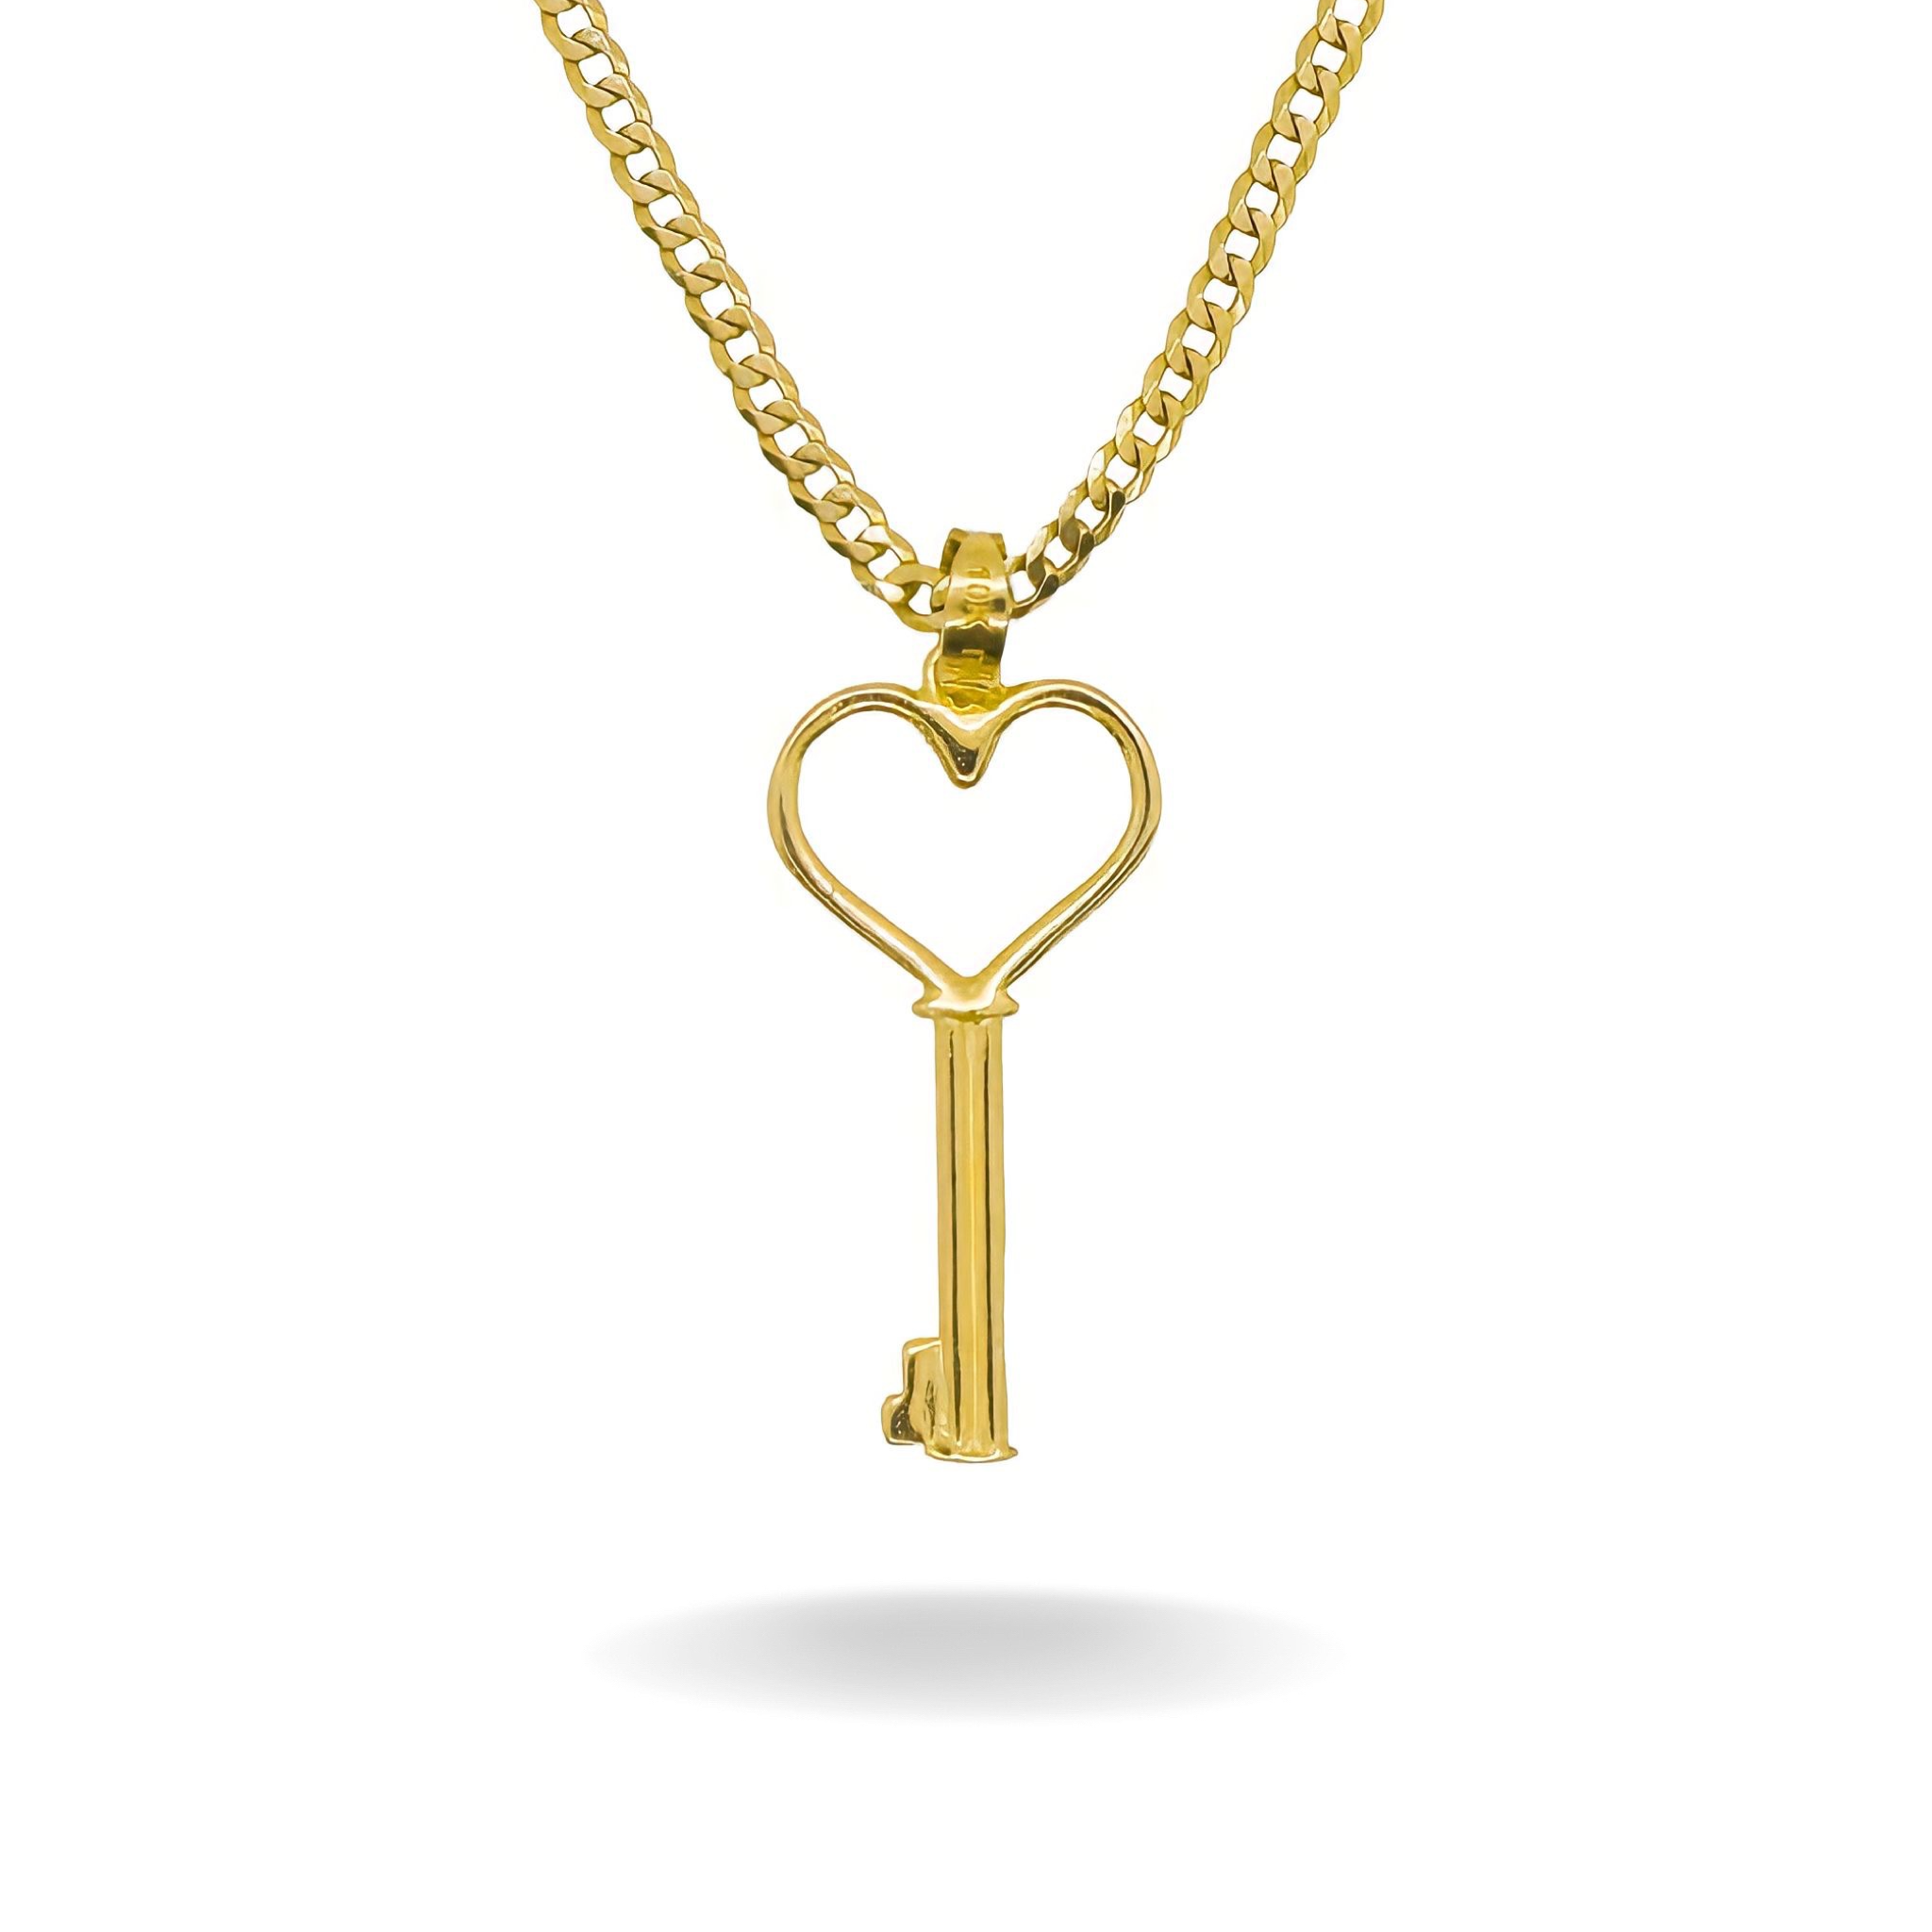 10K YELLOW GOLD HEART KEY NECKLACE